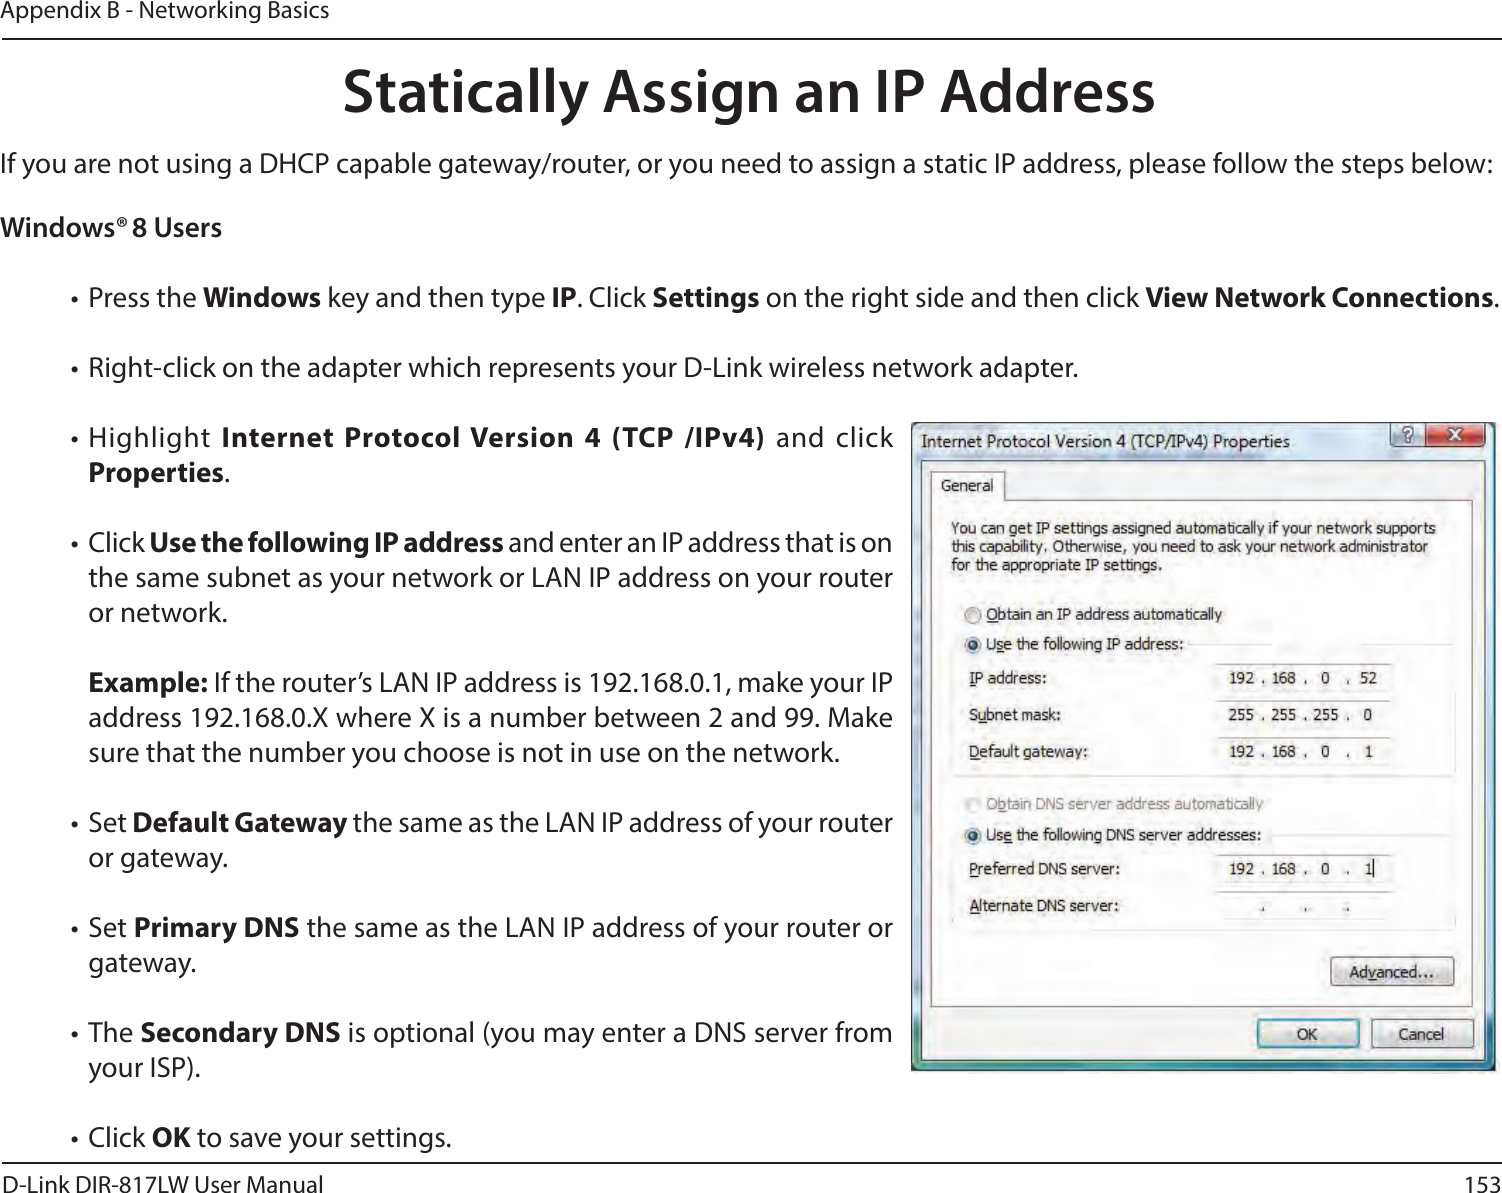 153D-Link DIR-817LW User ManualAppendix B - Networking BasicsWindows® 8 Users• Press the Windows key and then type IP. Click Settings on the right side and then click View Network Connections. • Right-click on the adapter which represents your D-Link wireless network adapter.• Highlight  Internet  Protocol Version  4  (TCP  /IPv4) and  click Properties.• Click Use the following IP address and enter an IP address that is on the same subnet as your network or LAN IP address on your router or network. Example: If the router’s LAN IP address is 192.168.0.1, make your IP address 192.168.0.X where X is a number between 2 and 99. Make sure that the number you choose is not in use on the network. • Set Default Gateway the same as the LAN IP address of your router or gateway.• Set Primary DNS the same as the LAN IP address of your router or gateway. • The Secondary DNS is optional (you may enter a DNS server from your ISP).• Click OK to save your settings.Statically Assign an IP AddressIf you are not using a DHCP capable gateway/router, or you need to assign a static IP address, please follow the steps below: